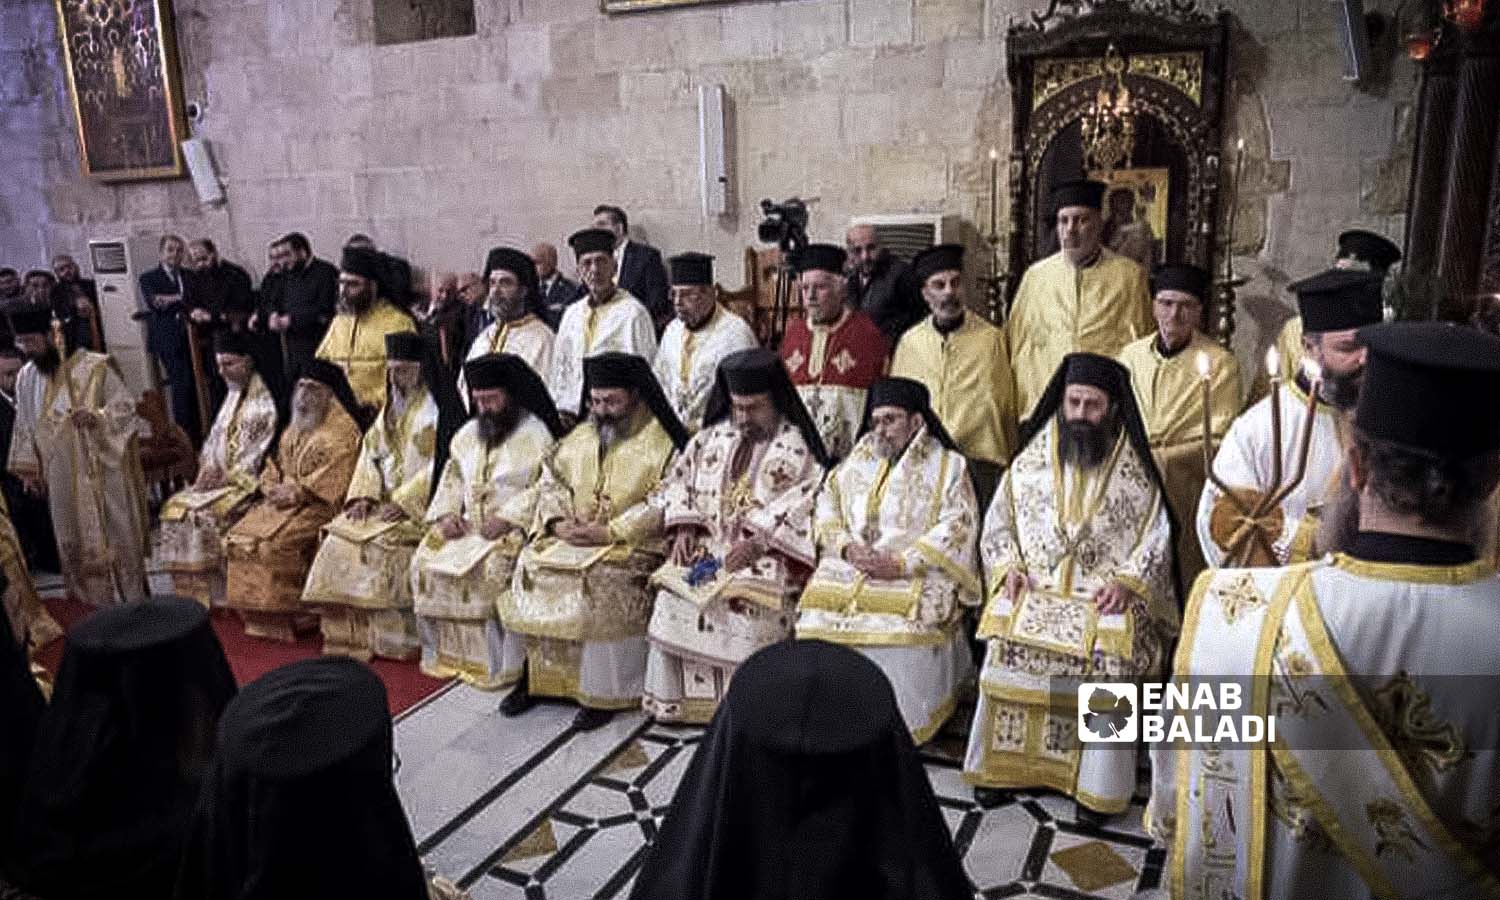 Patriarch John X attends a meeting in the diocese of Busra and Horan in the town of Khabab, south of Syria - December 16, 2023 (Enab Baladi/Sarah al-Ahmad)
